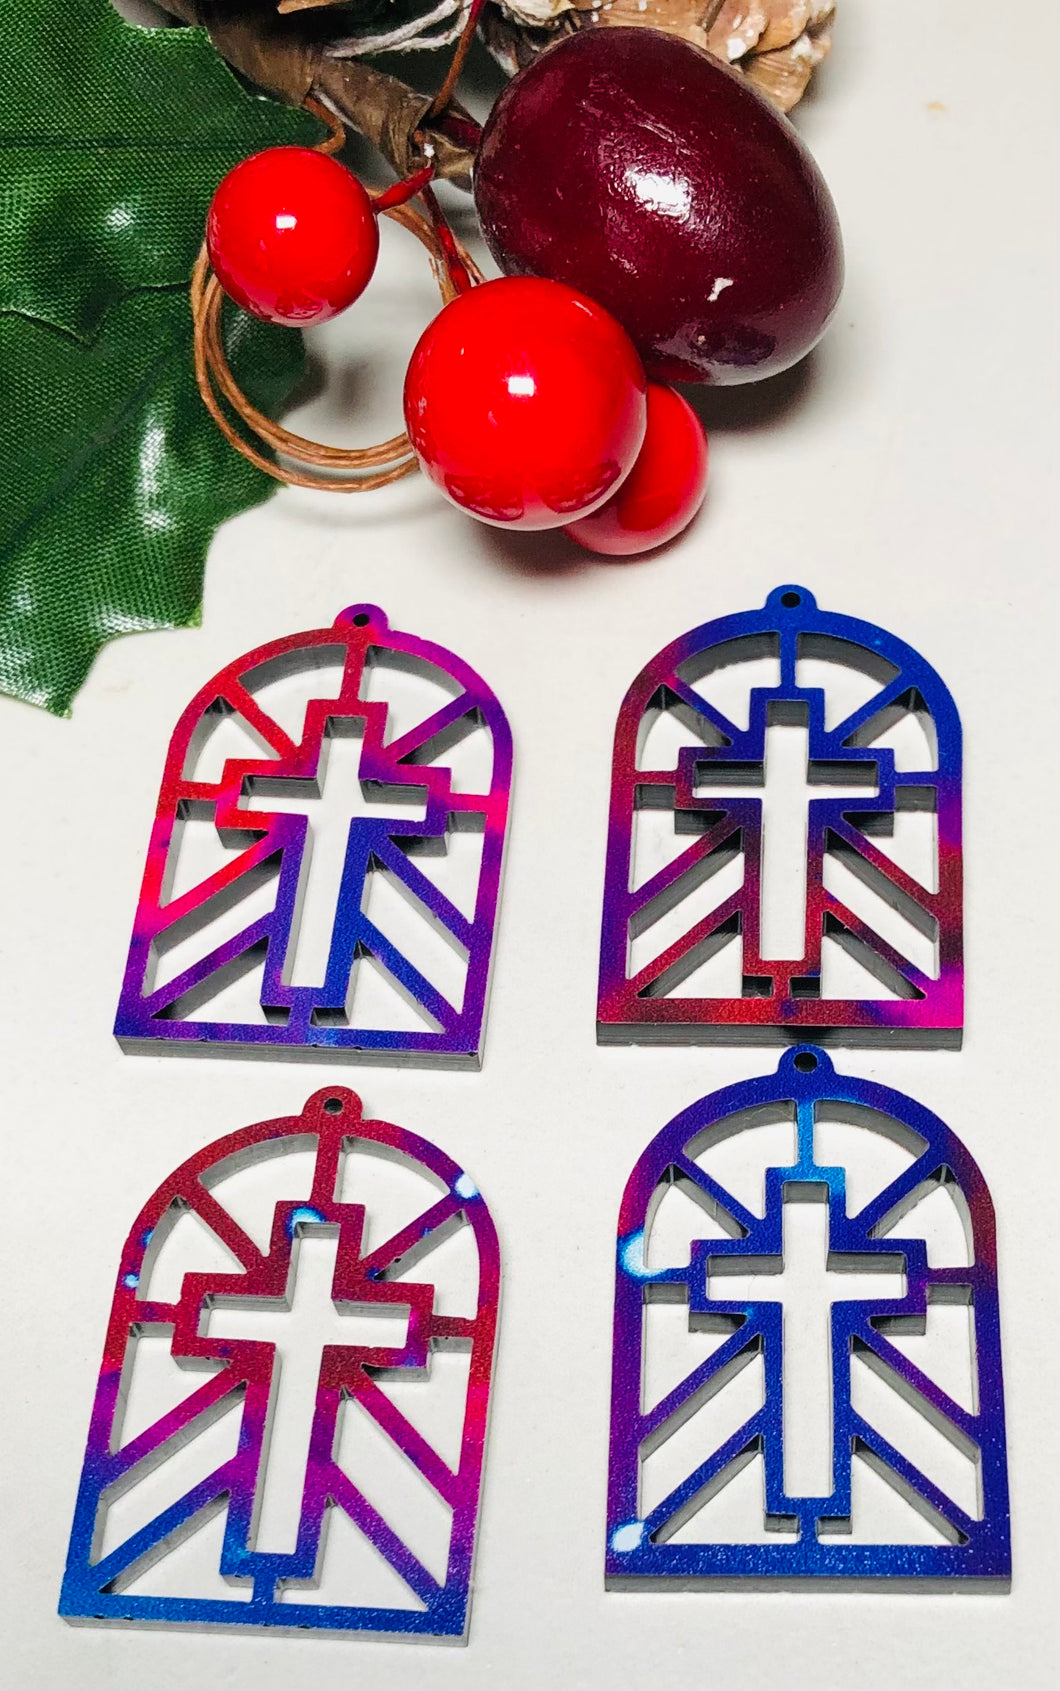 Stained Glass Cross Double Sided Jewelry findings, connectors, blanks, earring making, earring components, earring parts, earring pieces